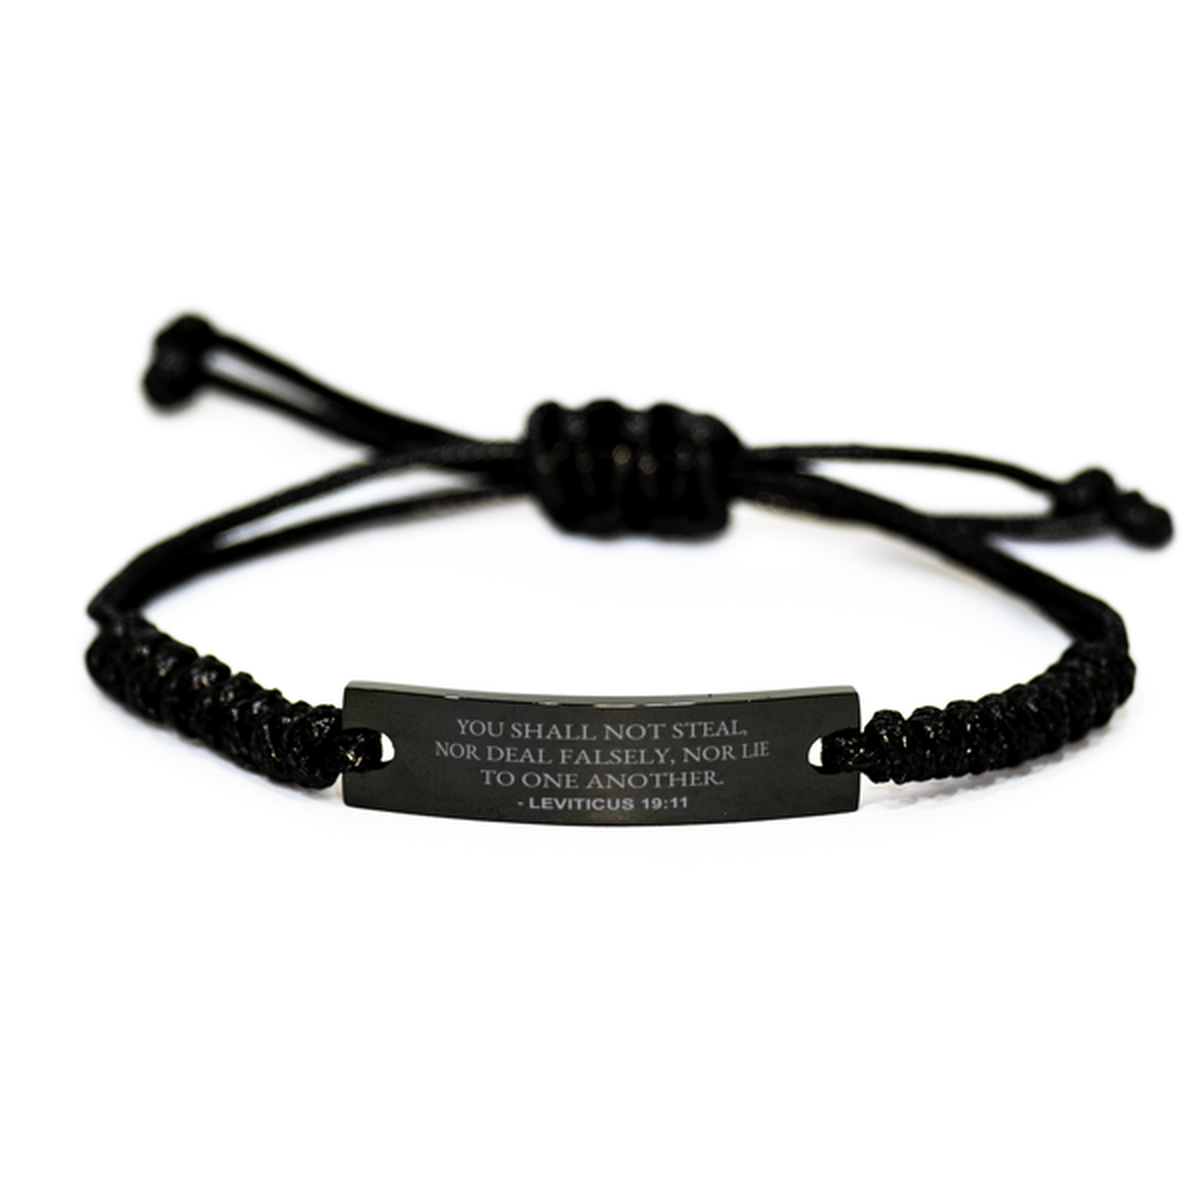 Bible Verse Rope Bracelet, Leviticus 19:11 You Shall Not Steal, Nor Deal Falsely, Christian Encouraging Gifts For Men Women Boys Girls